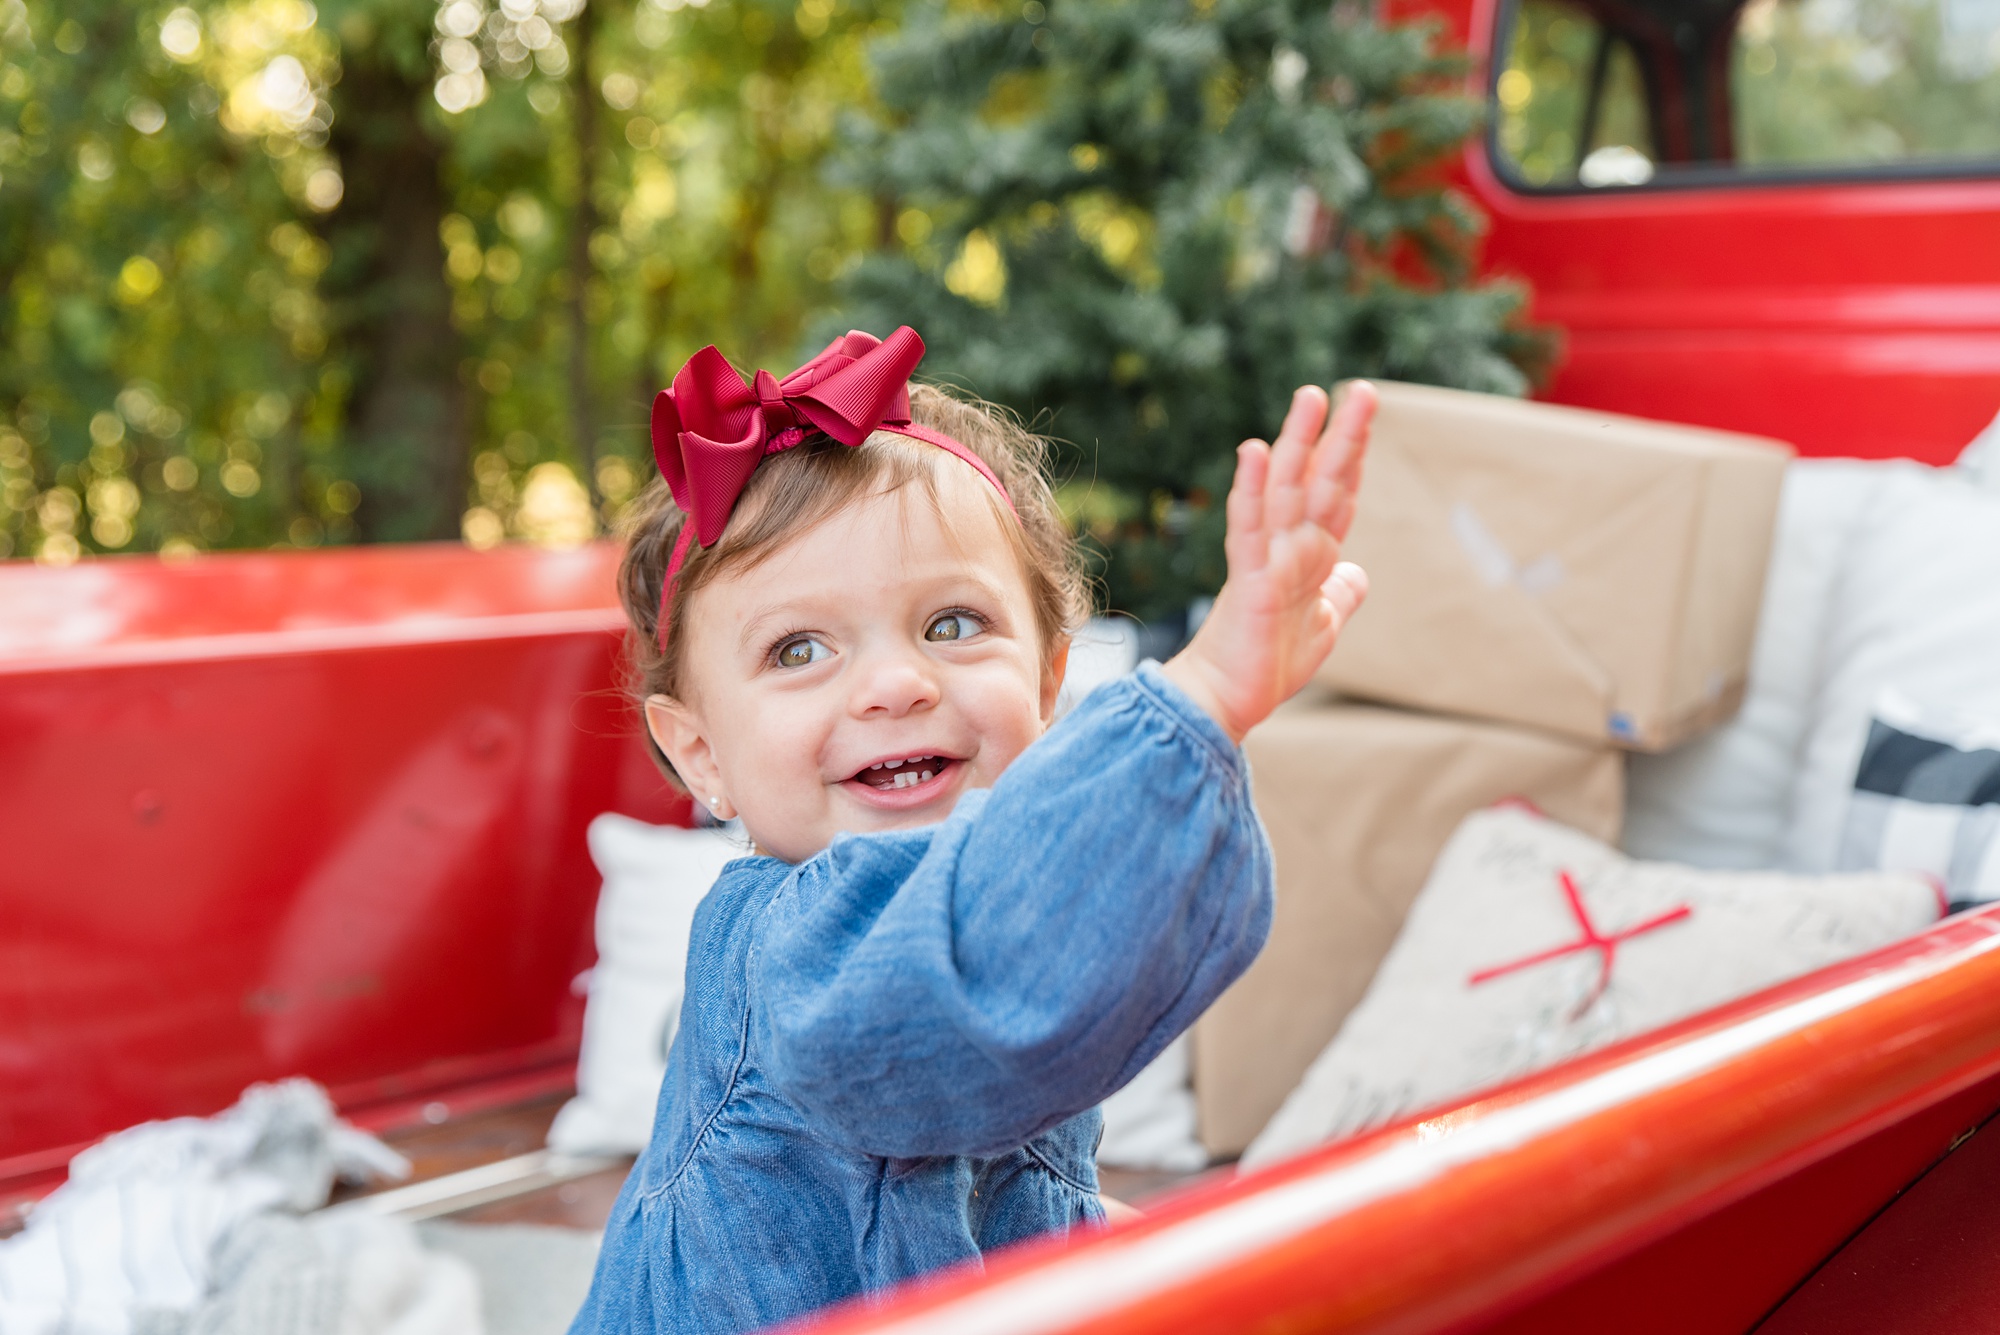 little girl in blue dress with red bow hits the side of truck